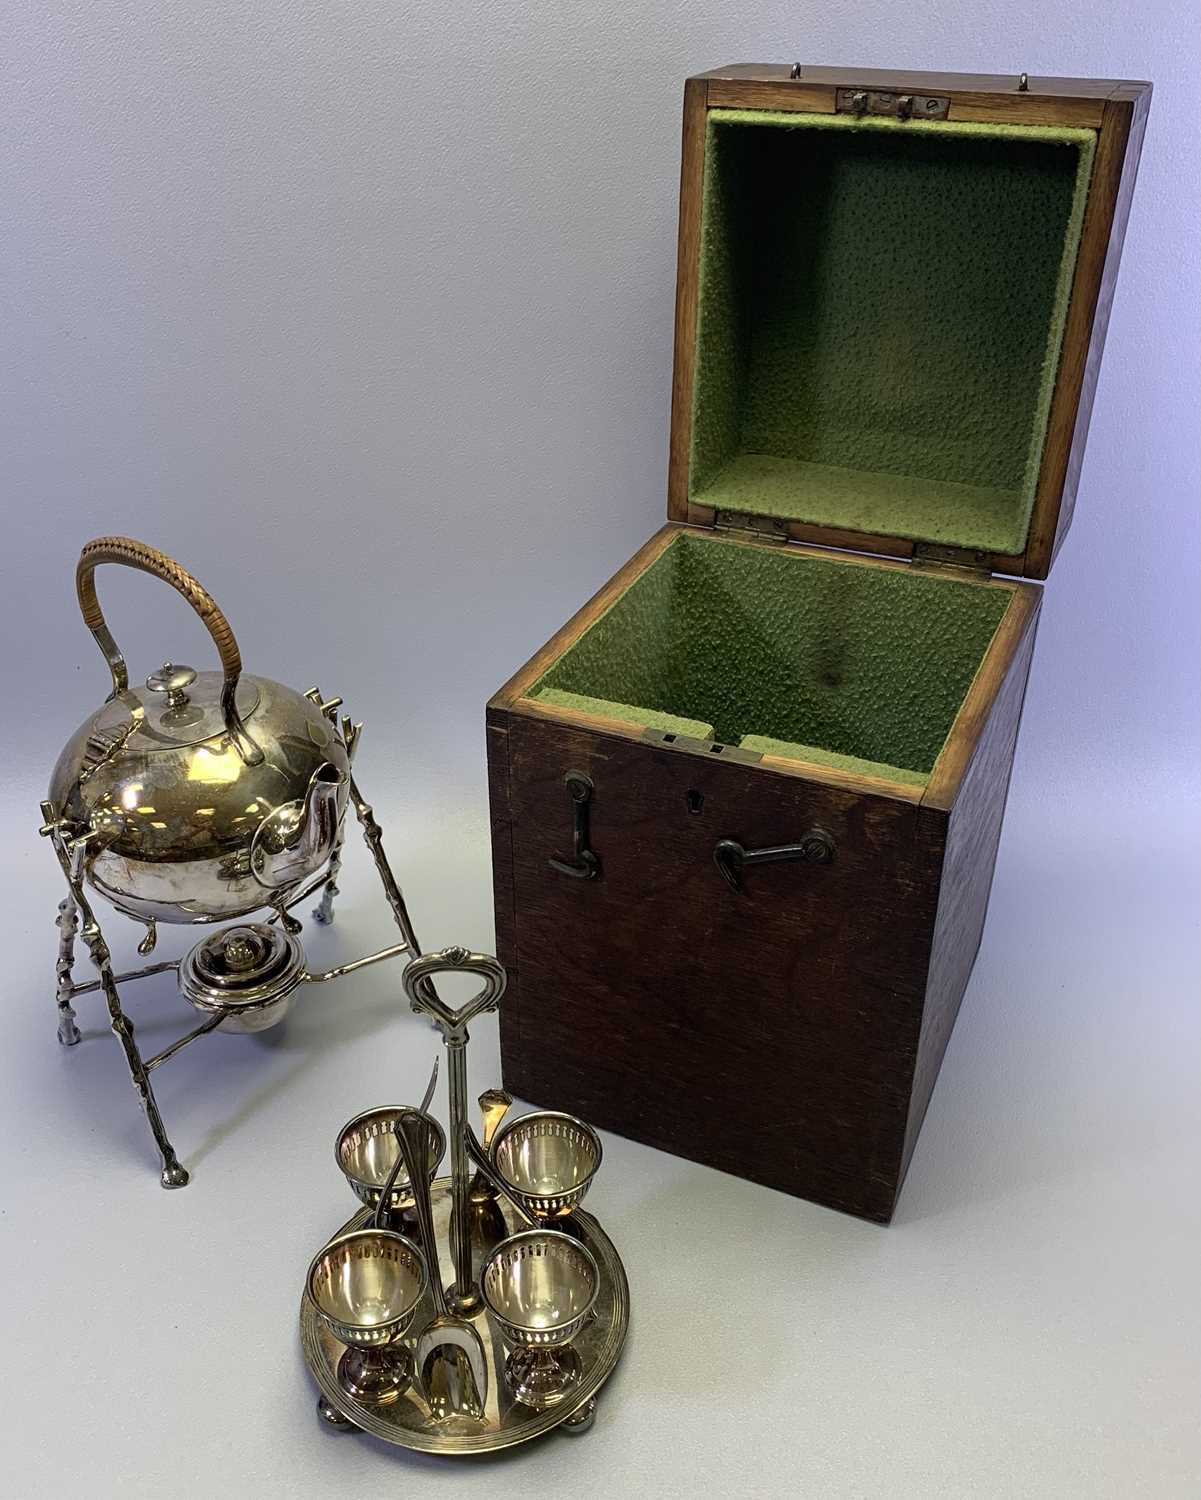 EPNS SPIRIT KETTLE ON STAND WITH BURNER and original wooden travel case, with an egg cup stand for